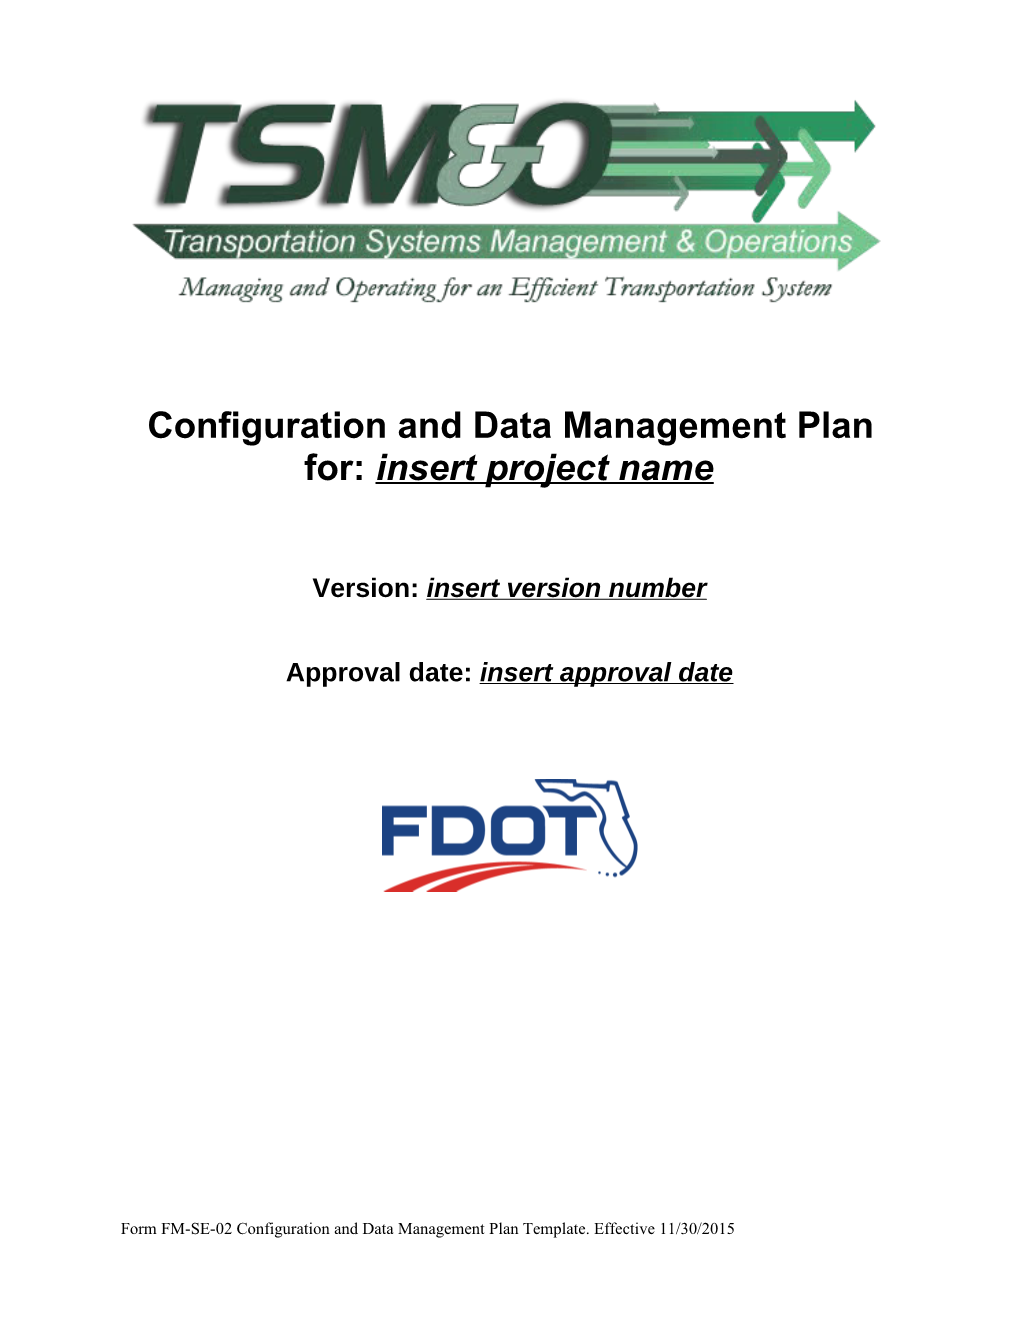 Configuration and Data Management Plan For:Insert Project Name